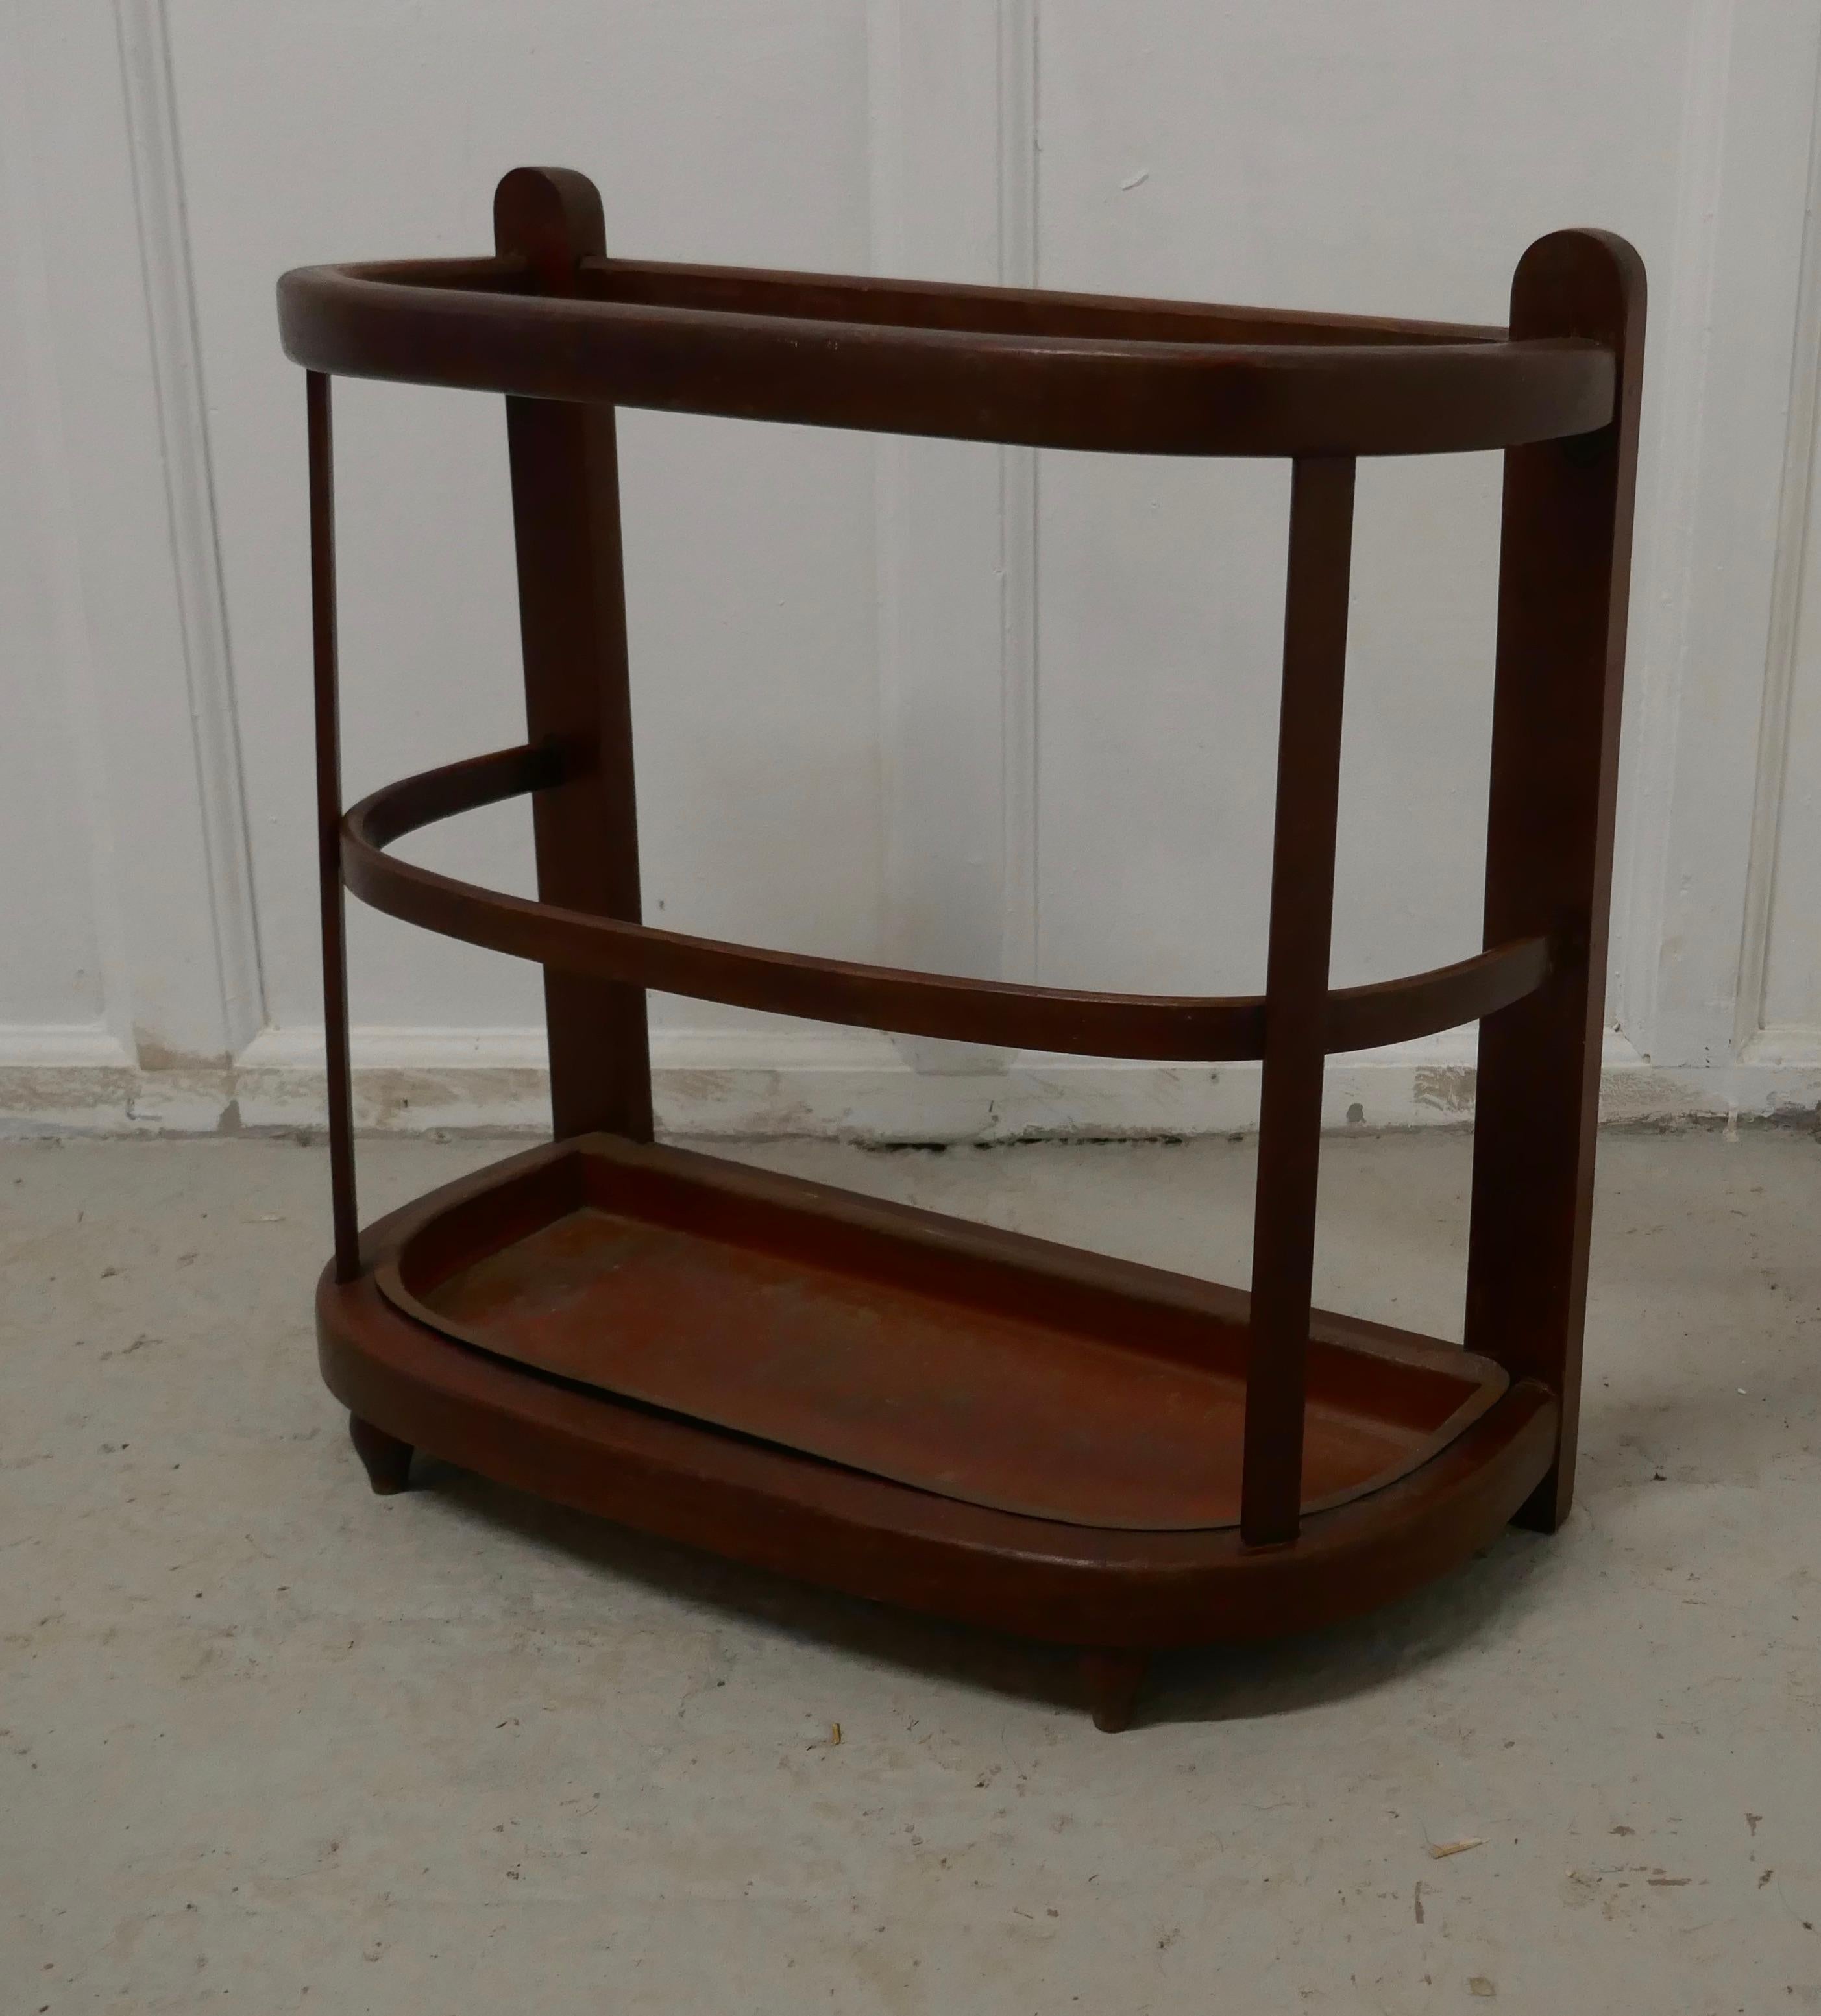 A curved French stick stand or umbrella hall stand

The stand is made to stand against a wall, the stand is in beech with a curved rail to the front, it comes with its original metal drip tray.
The stand will hold both walking sticks or umbrellas